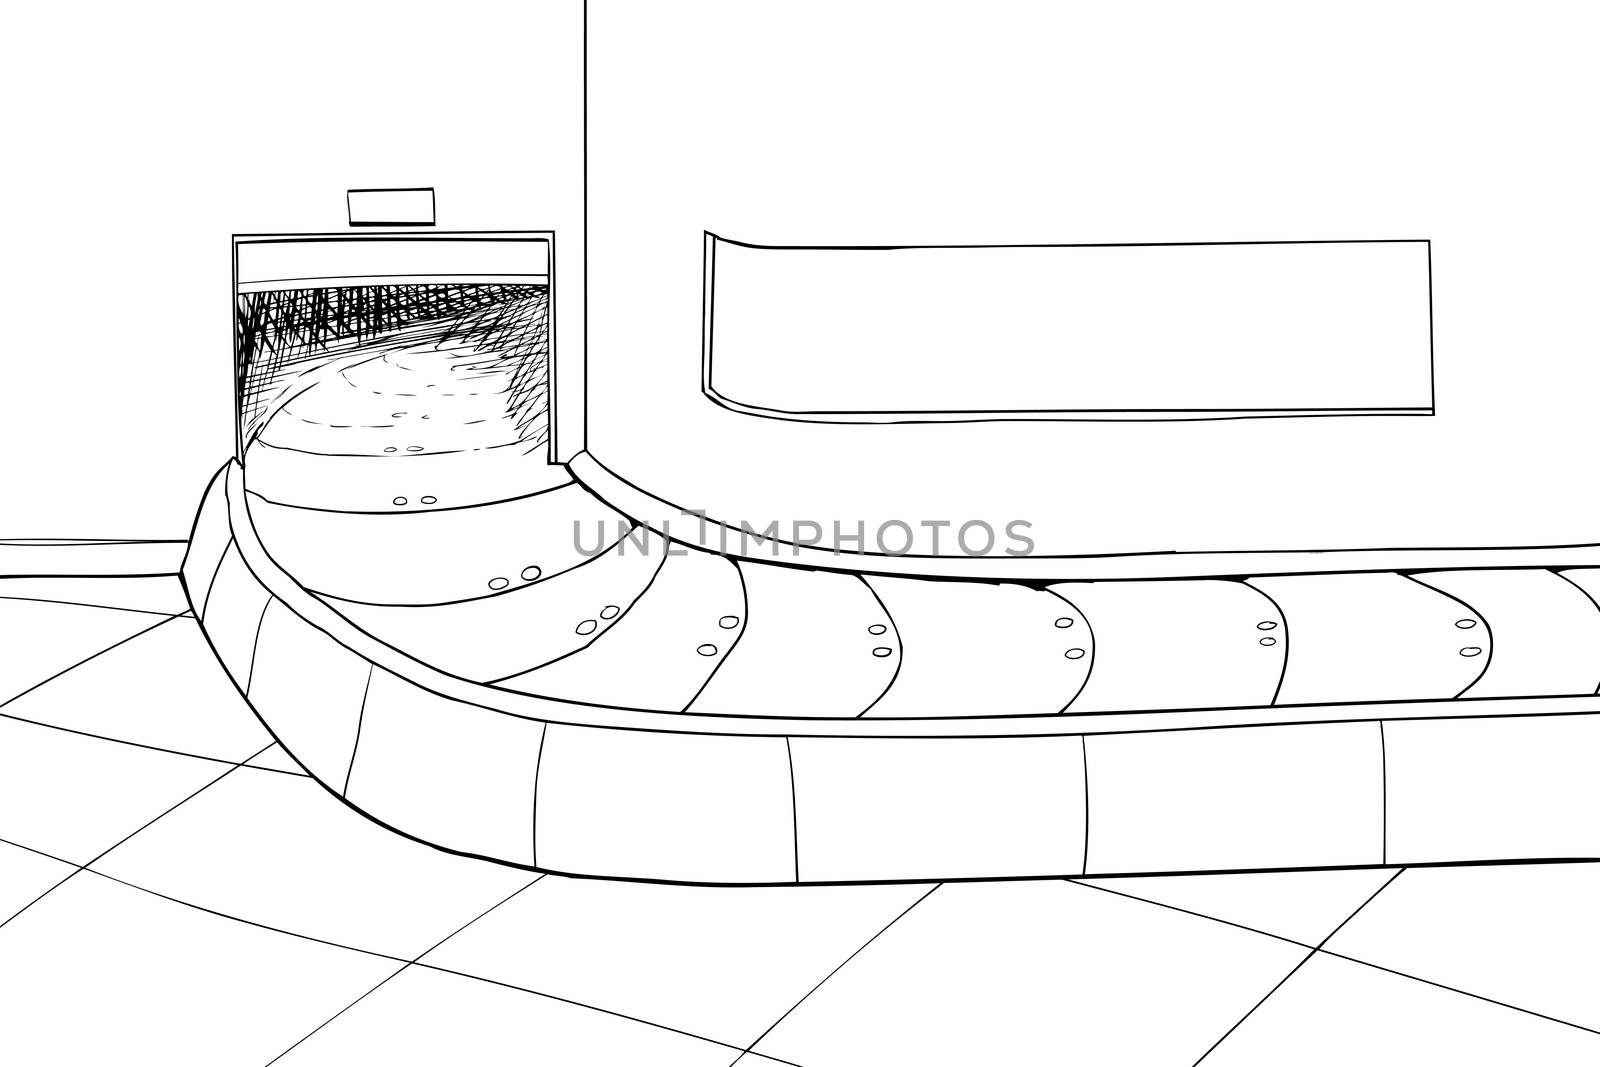 Outlined illustration of an empty baggage claim carousel area